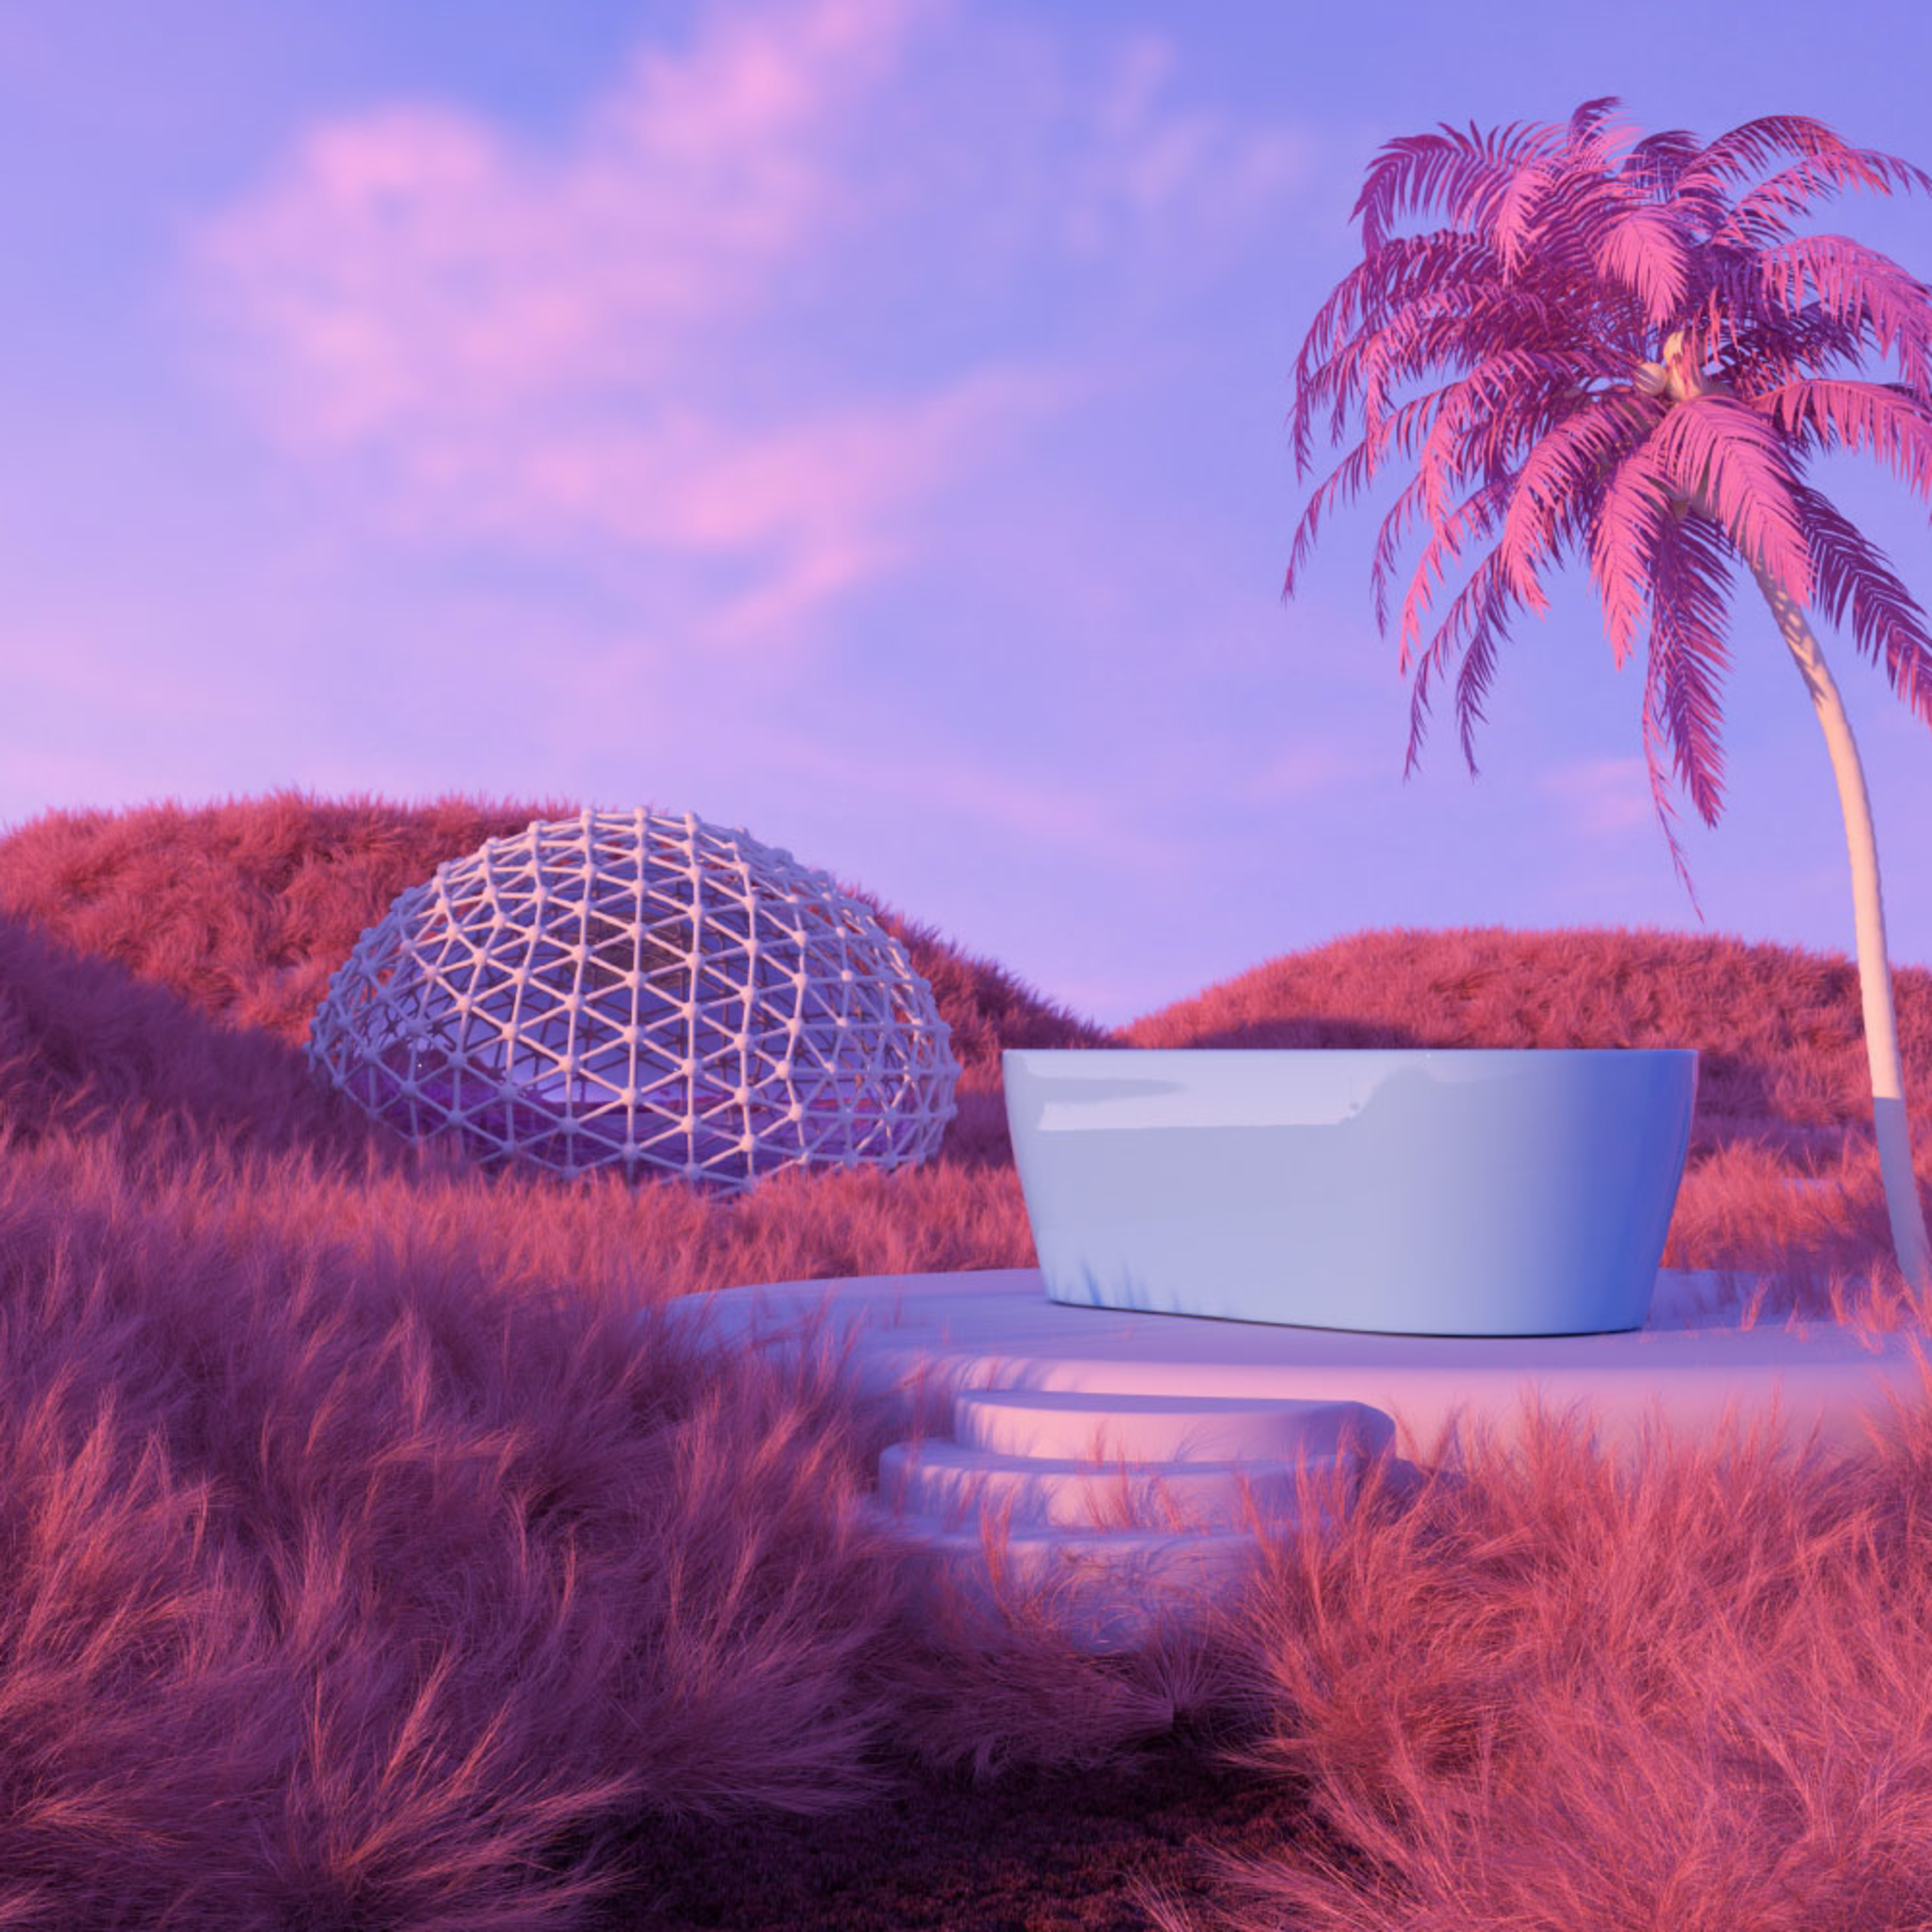 An image representing the metaverse with computer generated hills, a stone plinth in the centre and a palm tree